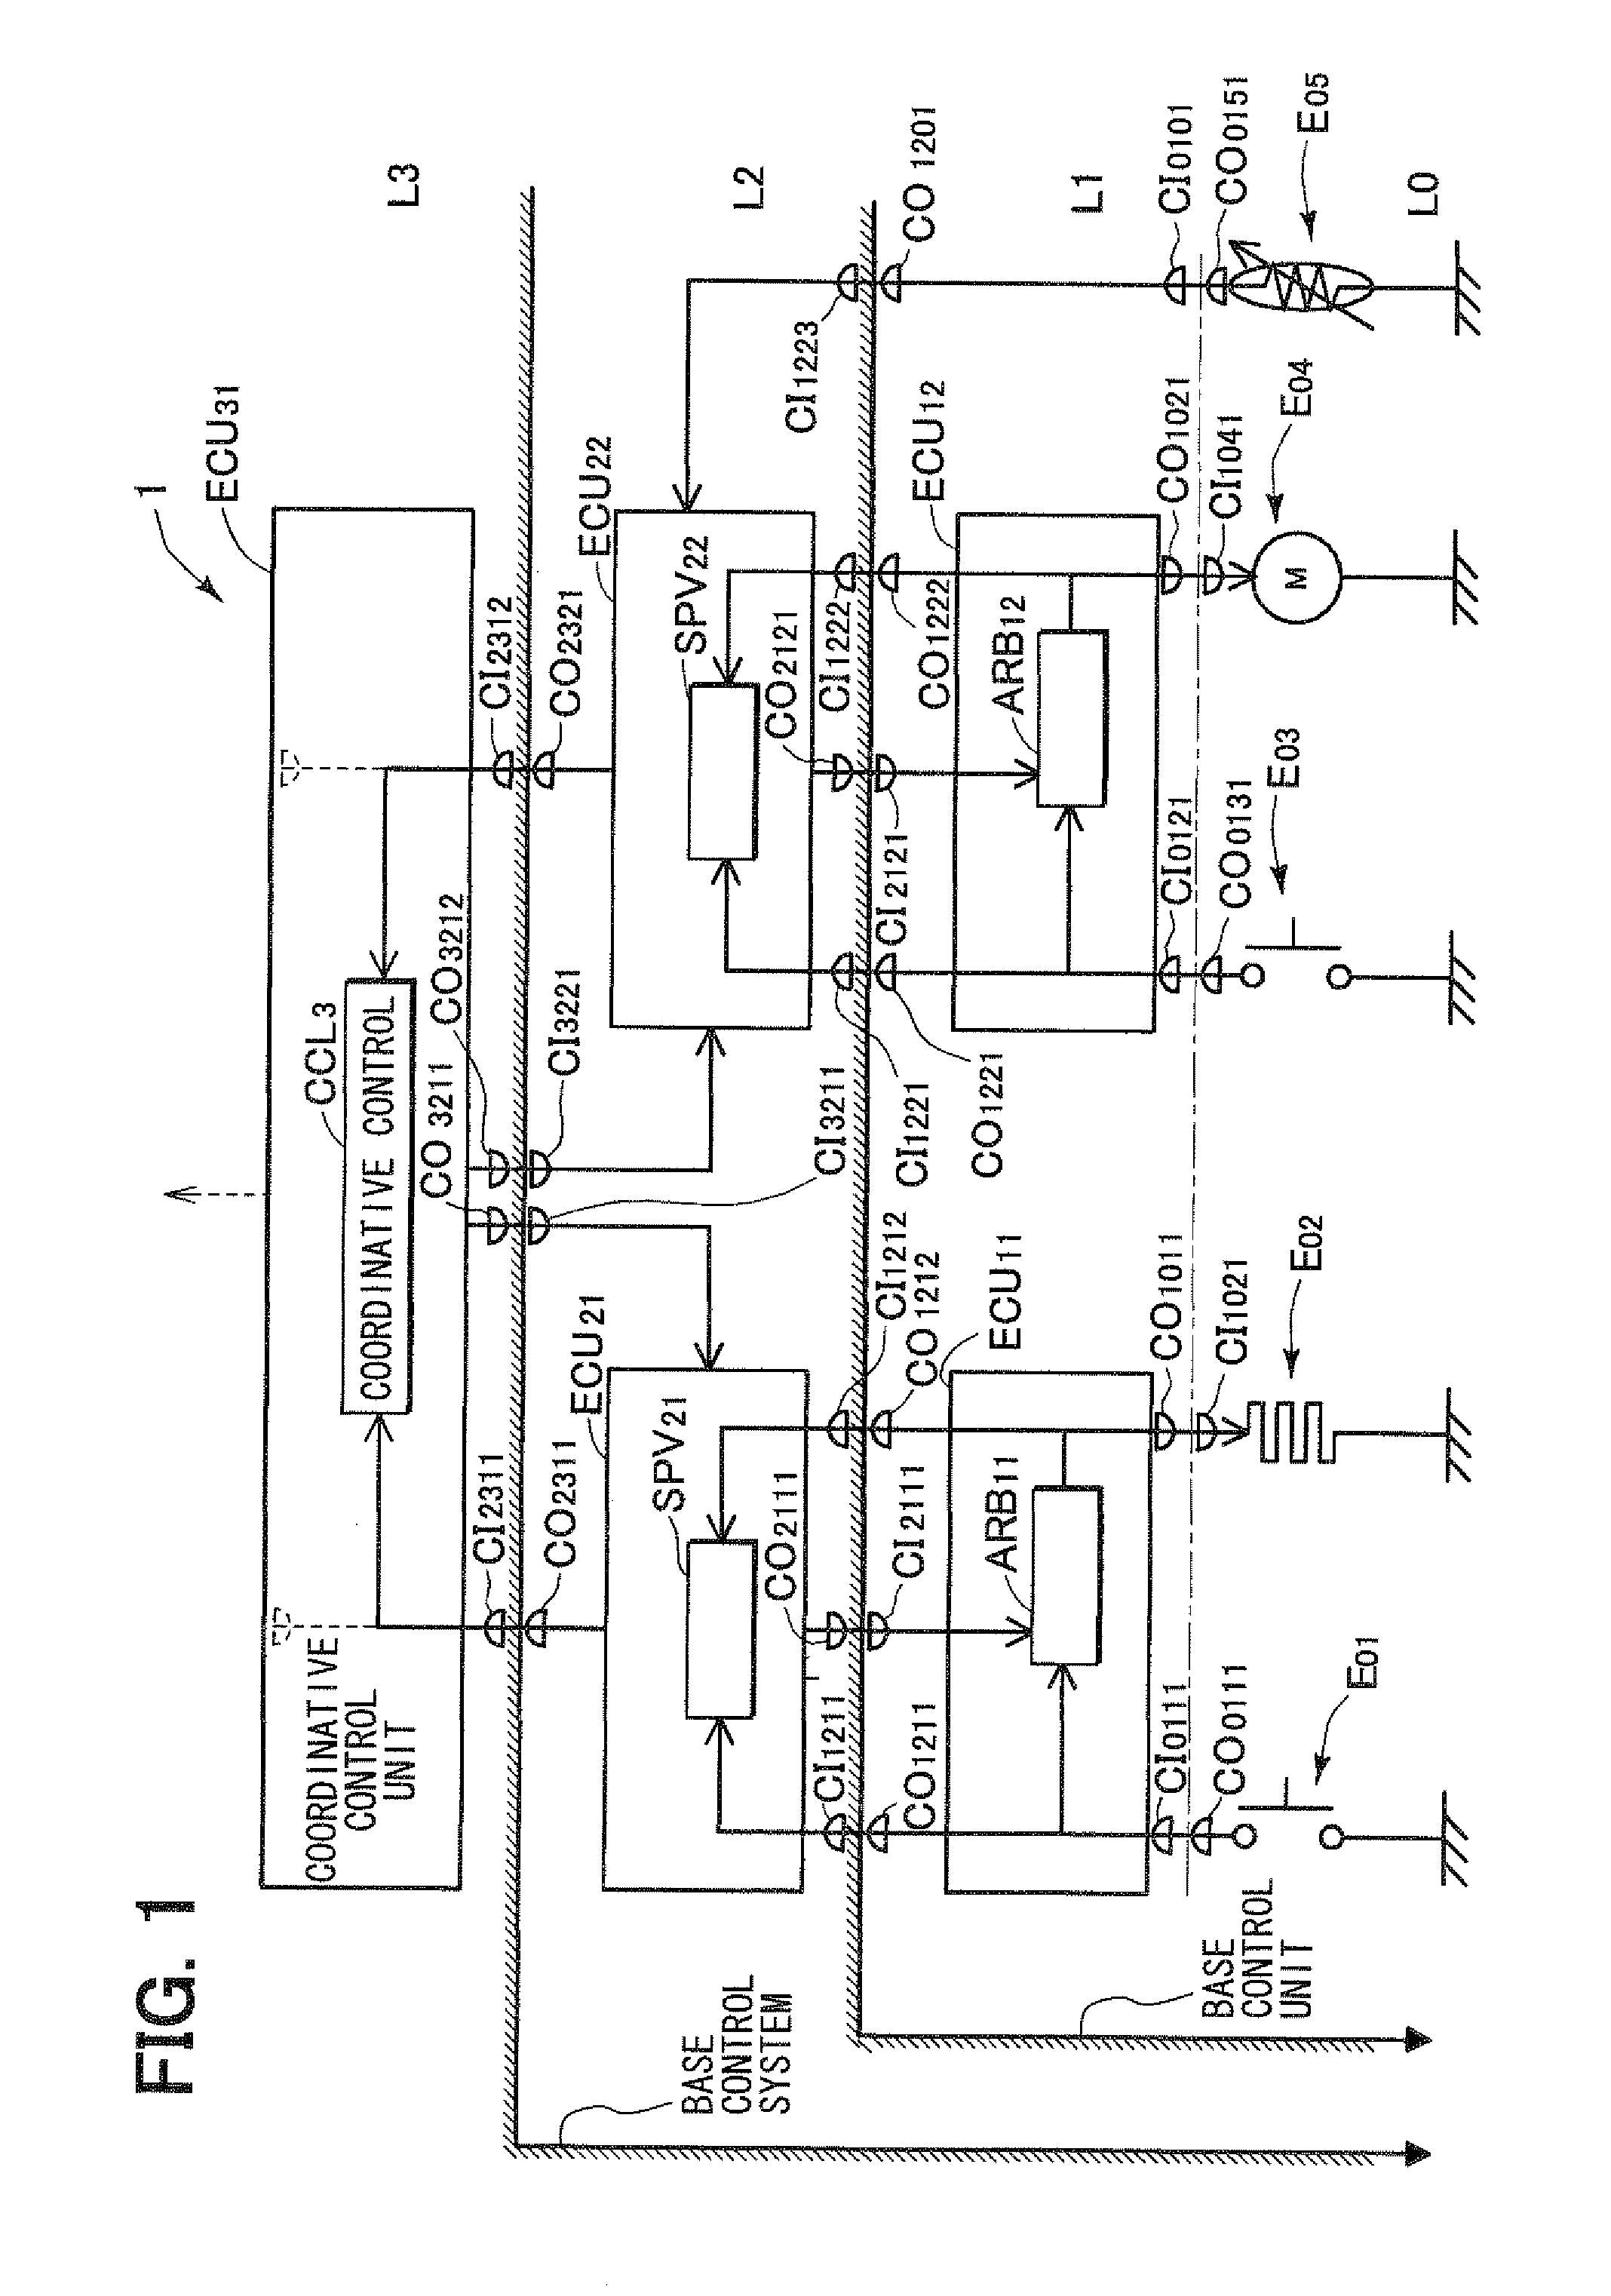 On-vehicle electronic device control system